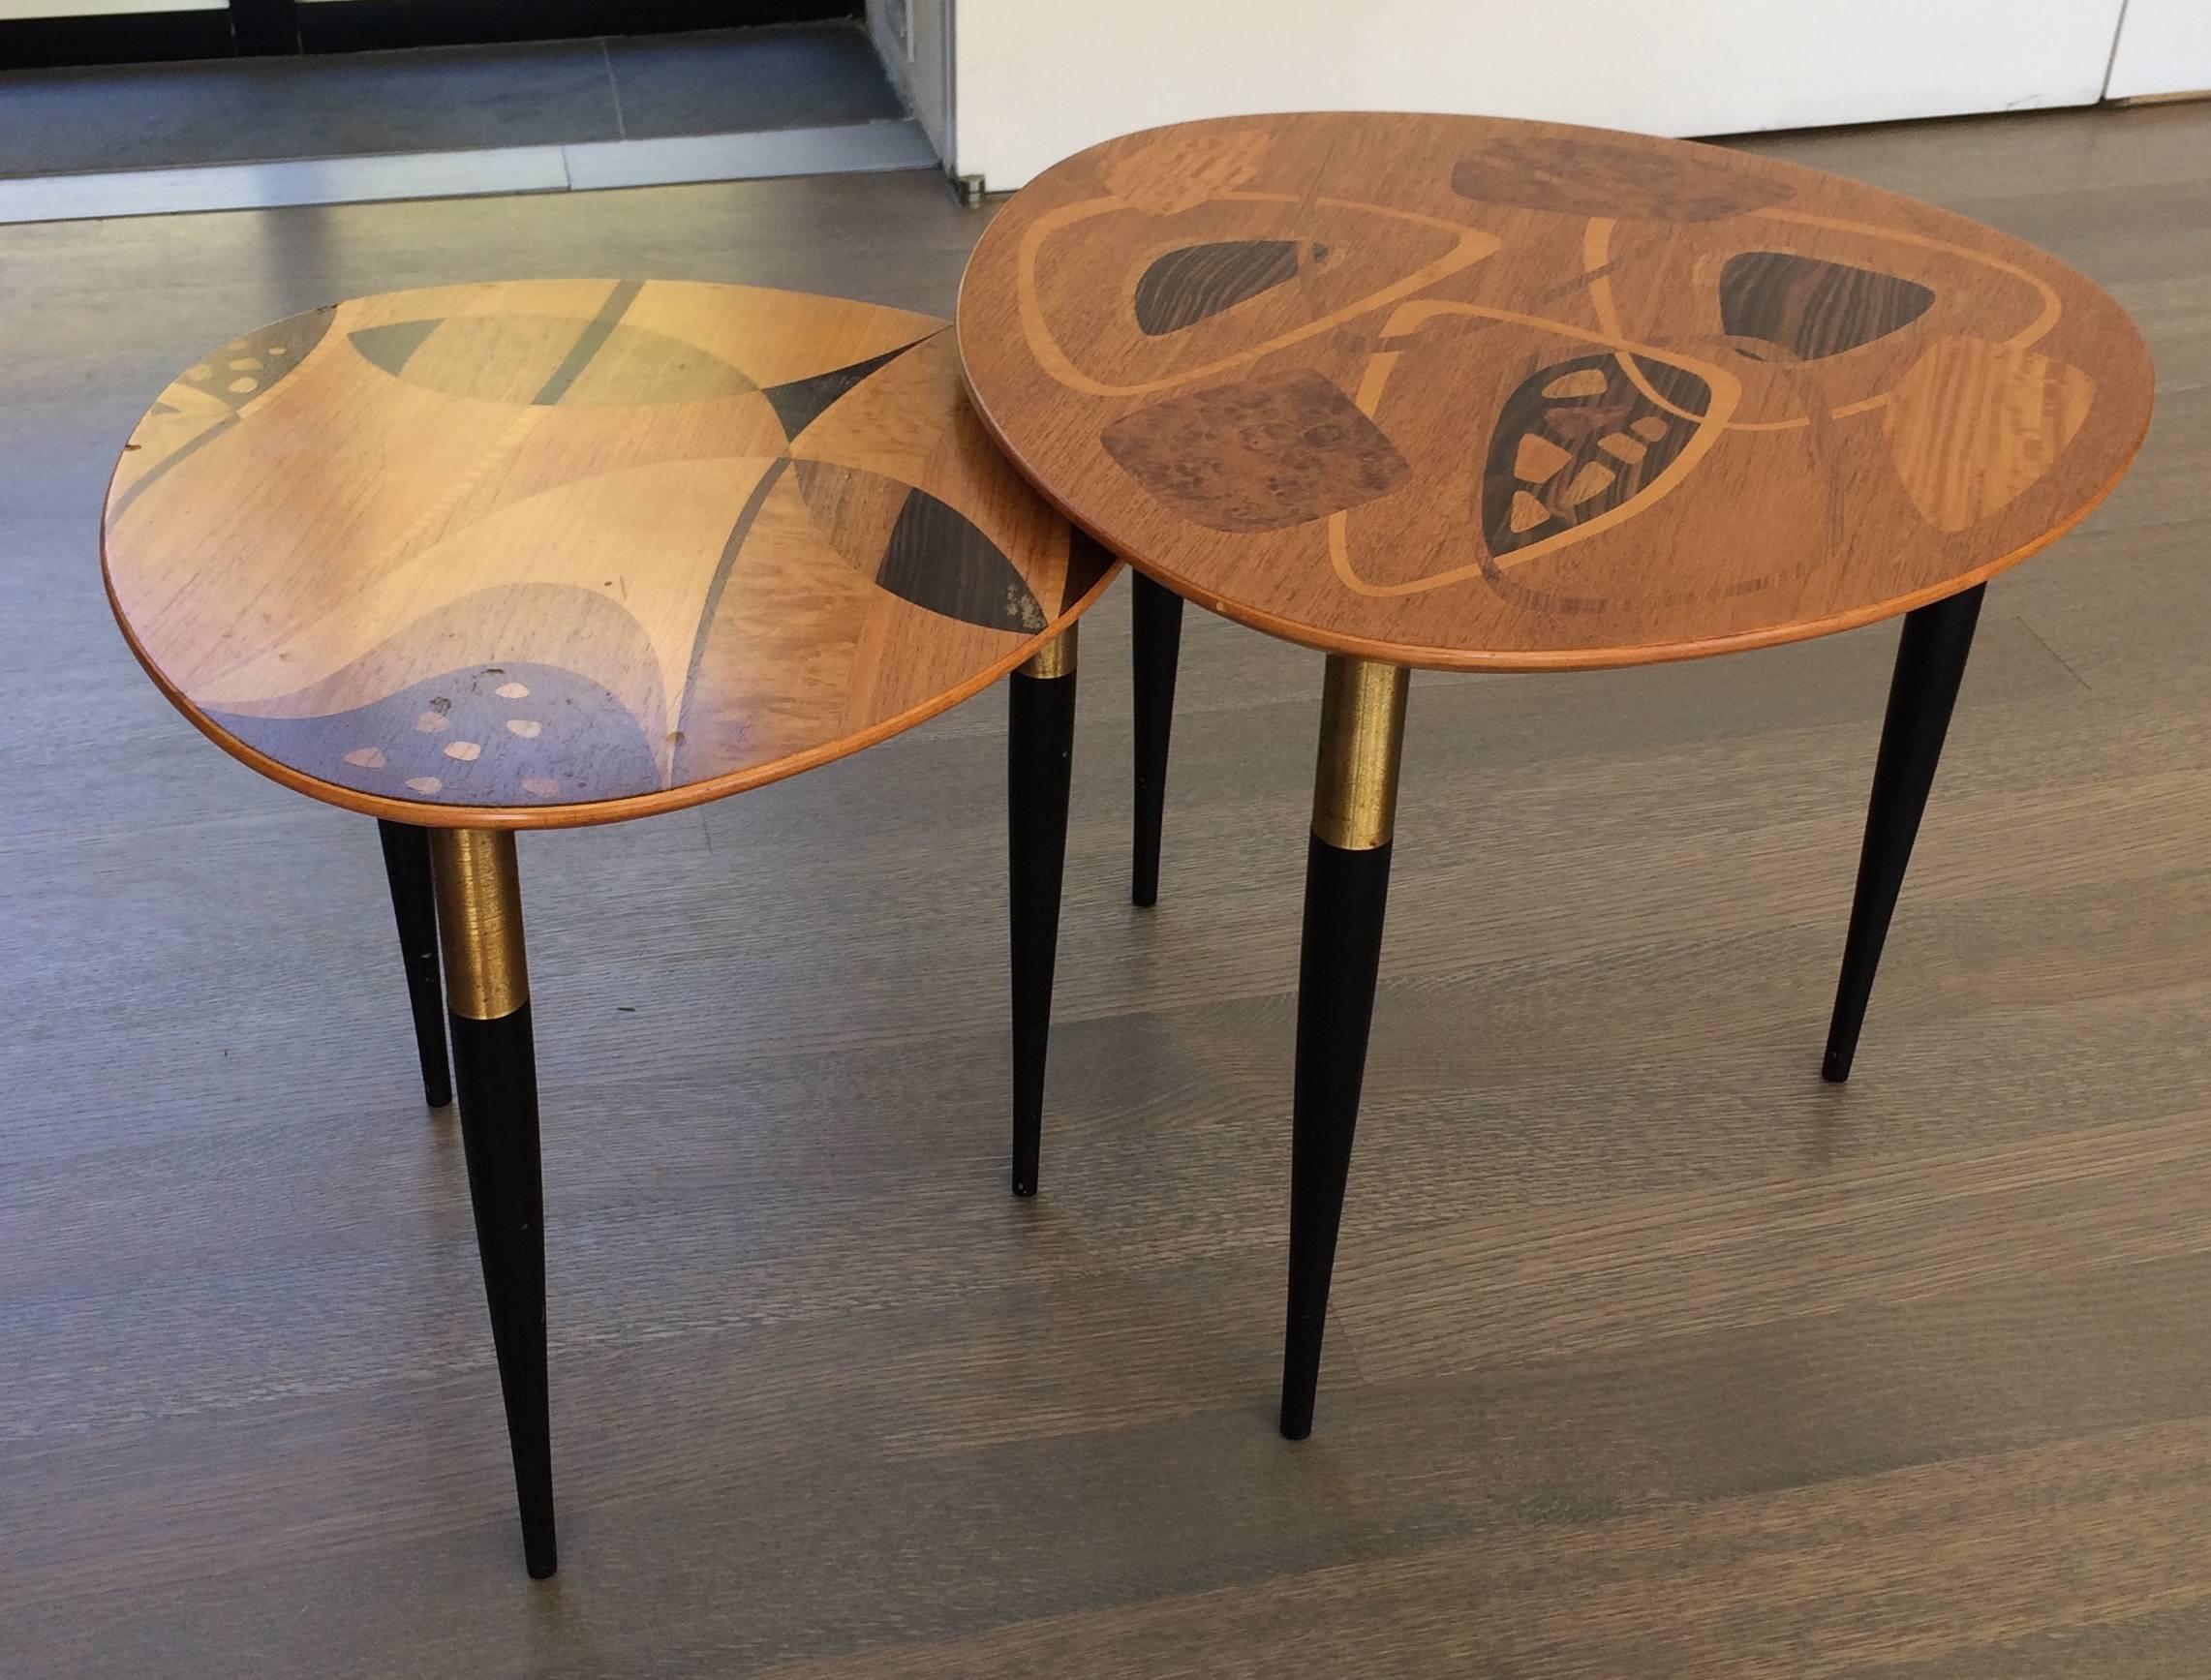 Two exotic wood inlay tables with abstract designs by Erno Fabry, with brass detail, made in Sweden 1953 for Erno Fabry. Larger one is 22